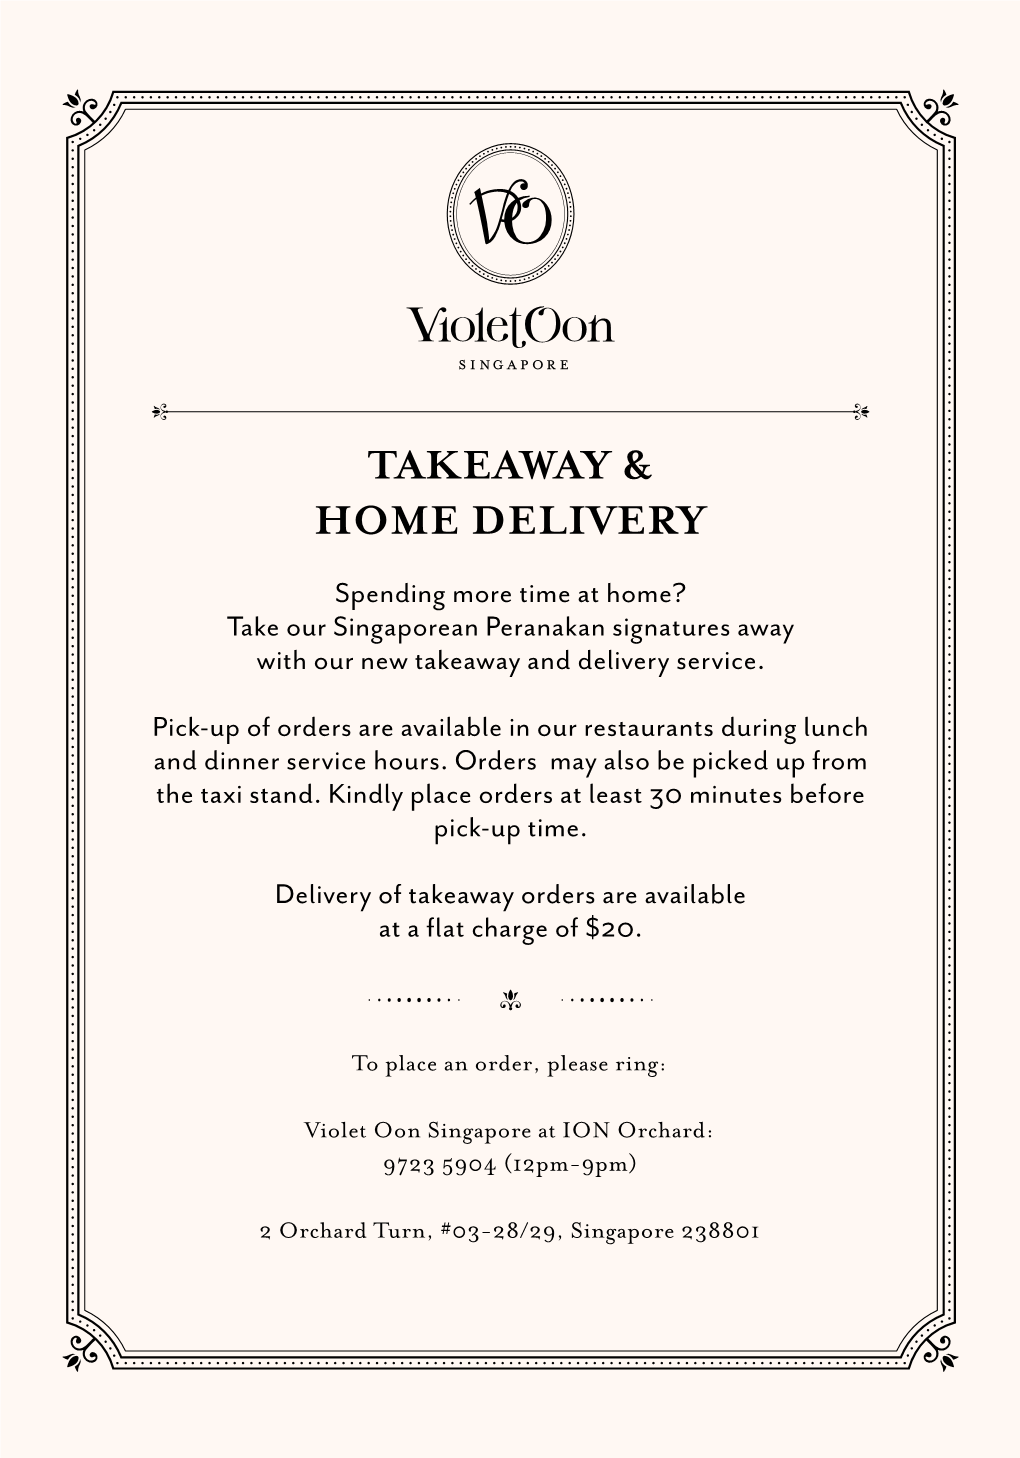 Takeaway & Home Delivery